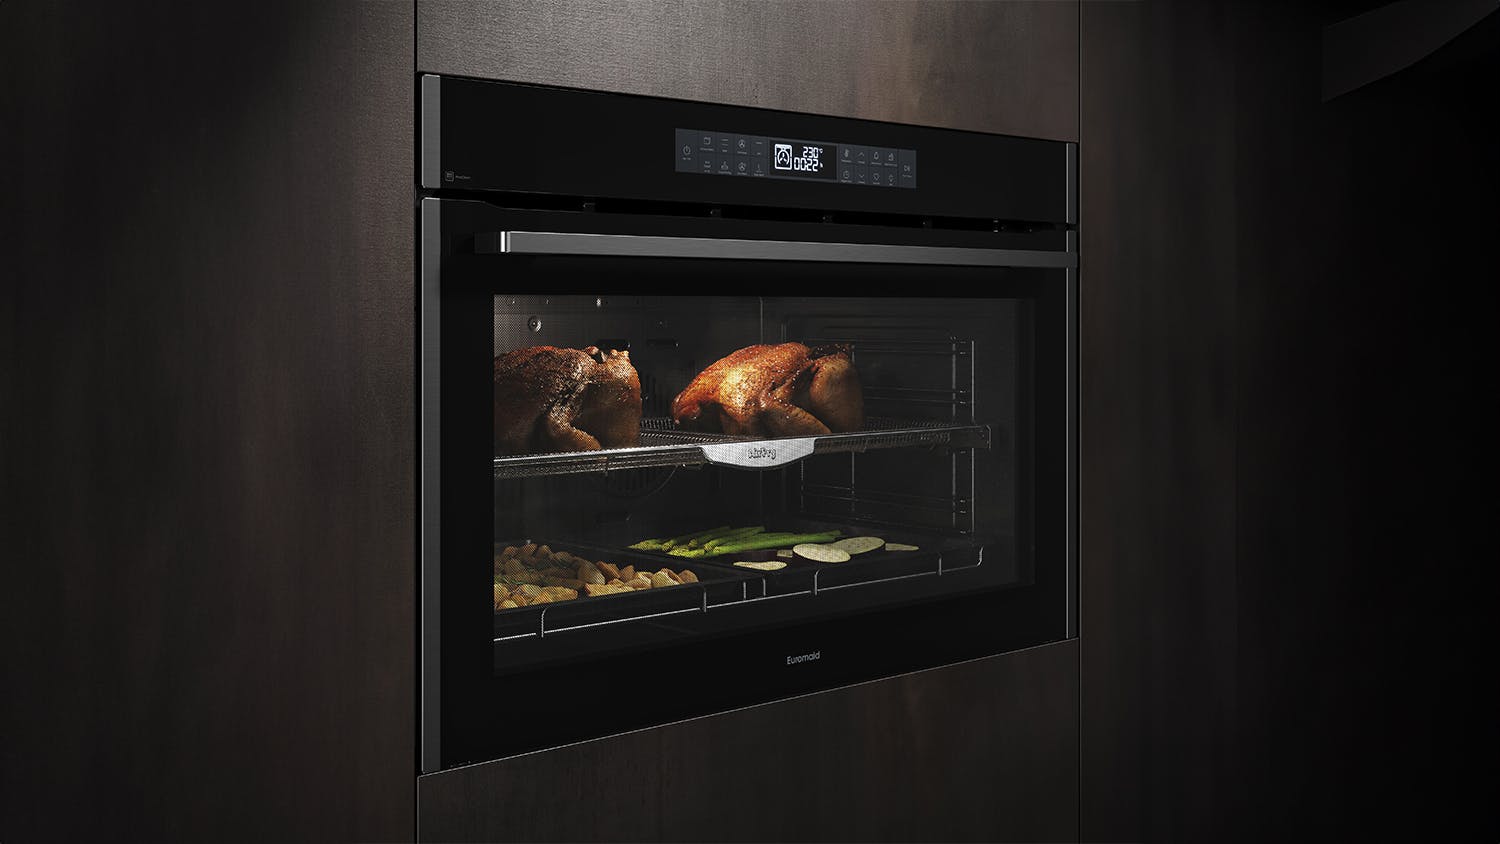 Euromaid 90cm Pyrolytic 17 Function Built-In Oven - Dark Stainless Steel (EPO917ASTB)